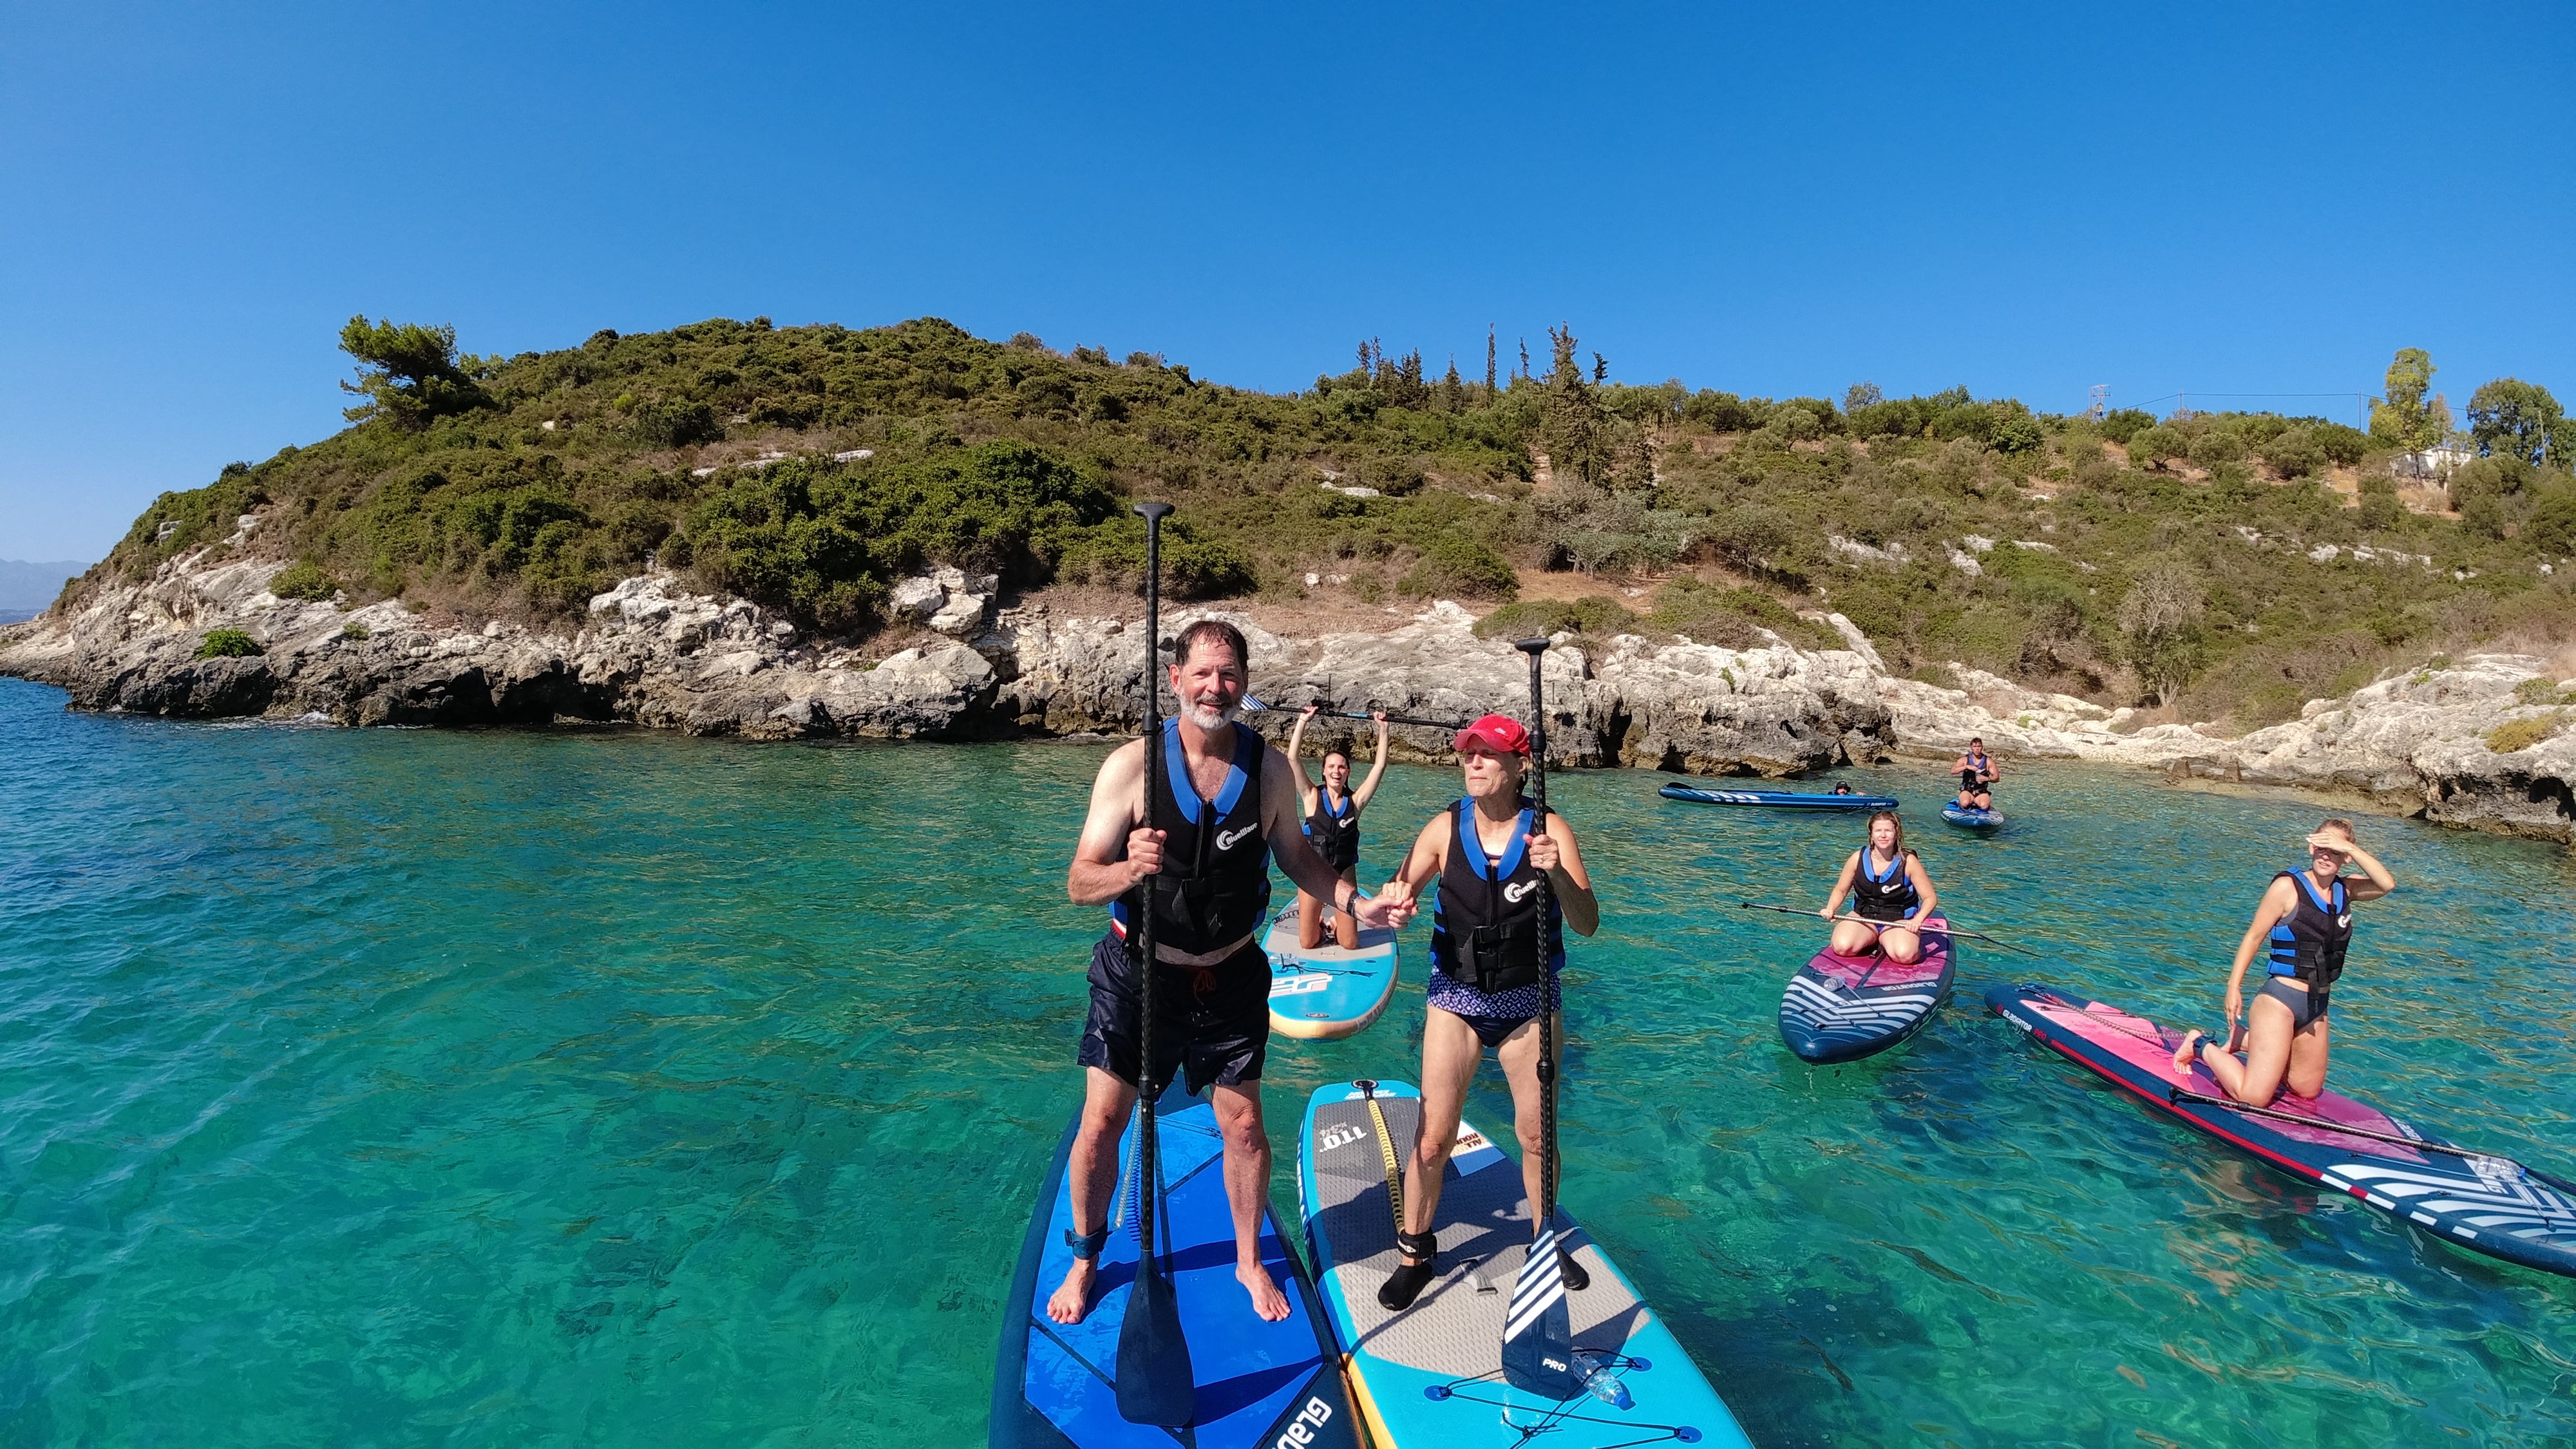 The calm waters around Crete are great to learn SUP Crete